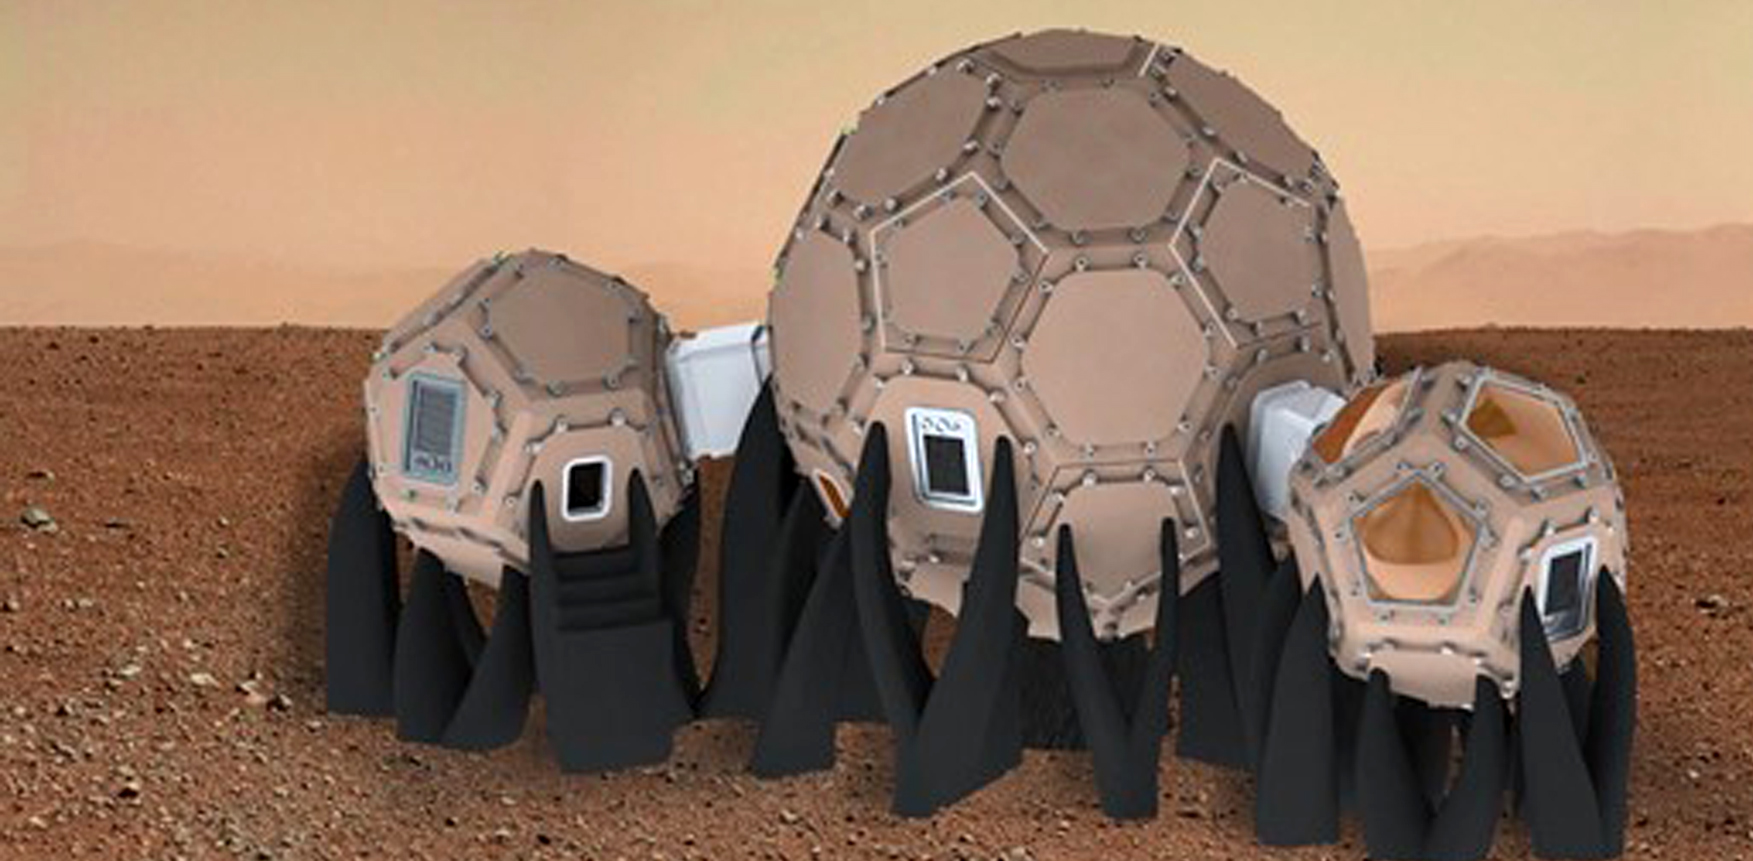 Mars Incubator for 3D-Printed Habitat Challenge Phase: 3 Level 1 competition